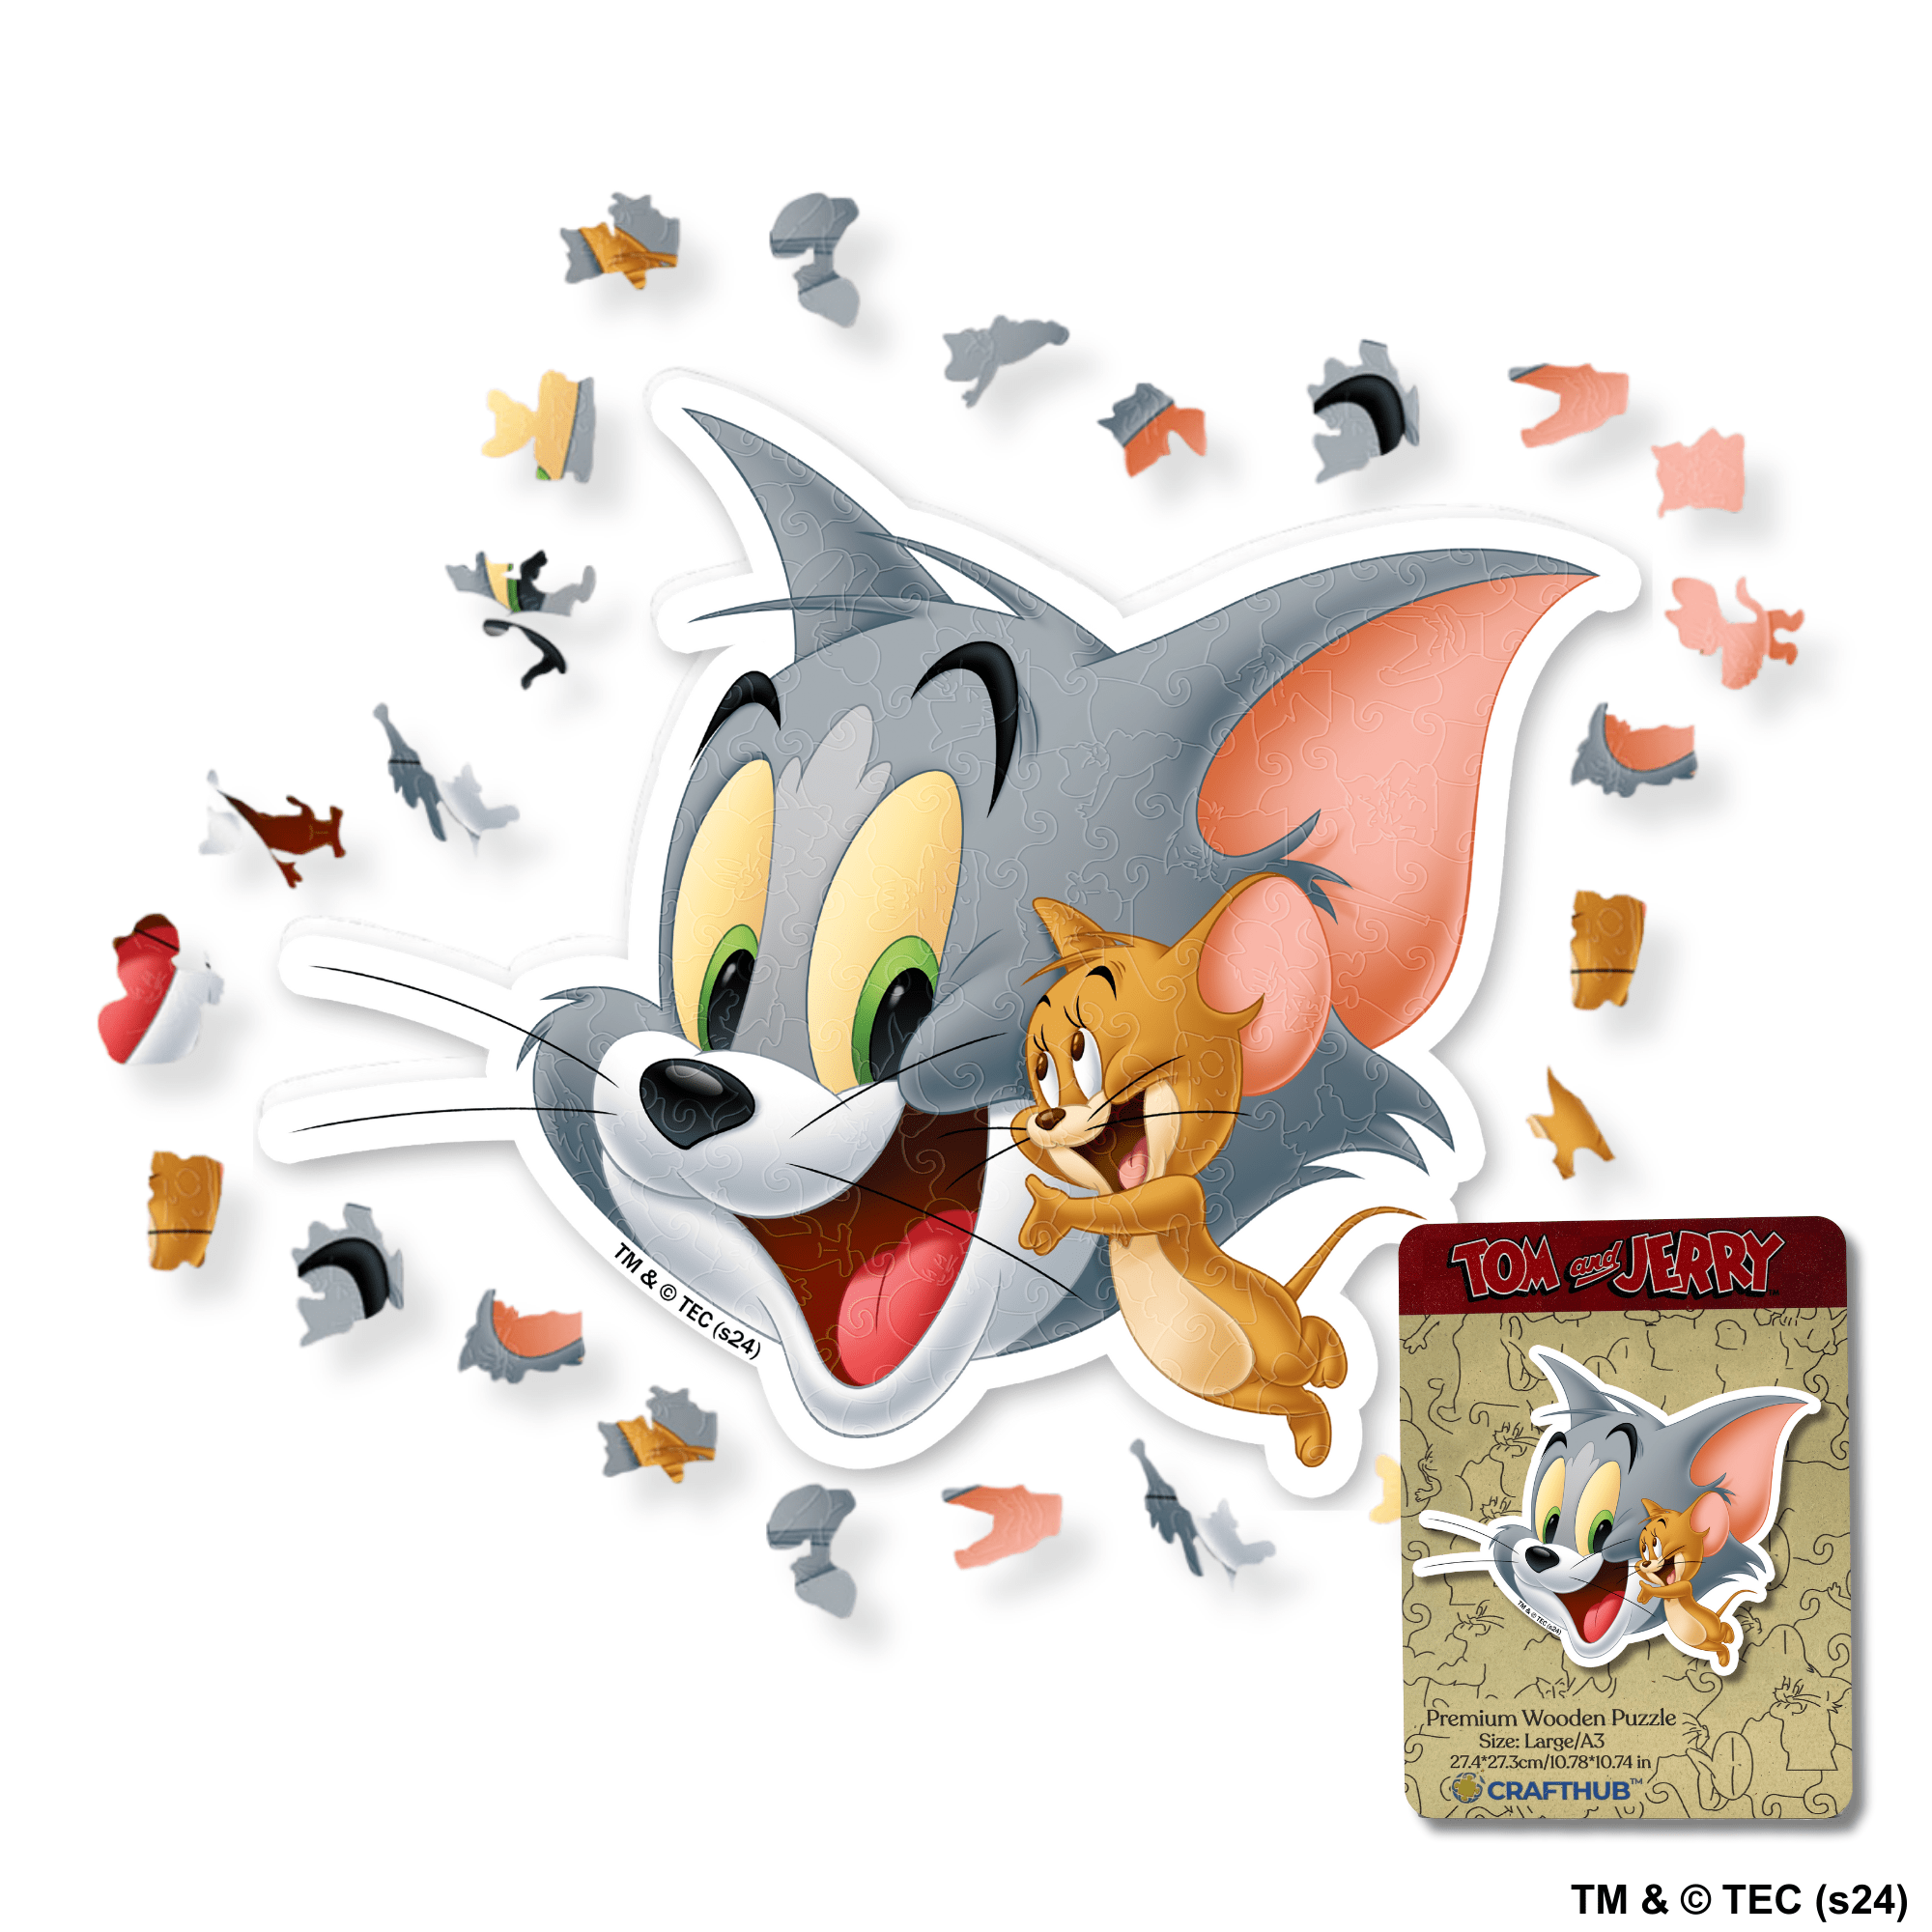 Animal Jigsaw Puzzle > Wooden Jigsaw Puzzle > Jigsaw Puzzle A3 Joyful Tom & Jerry Wooden Jigsaw Puzzle